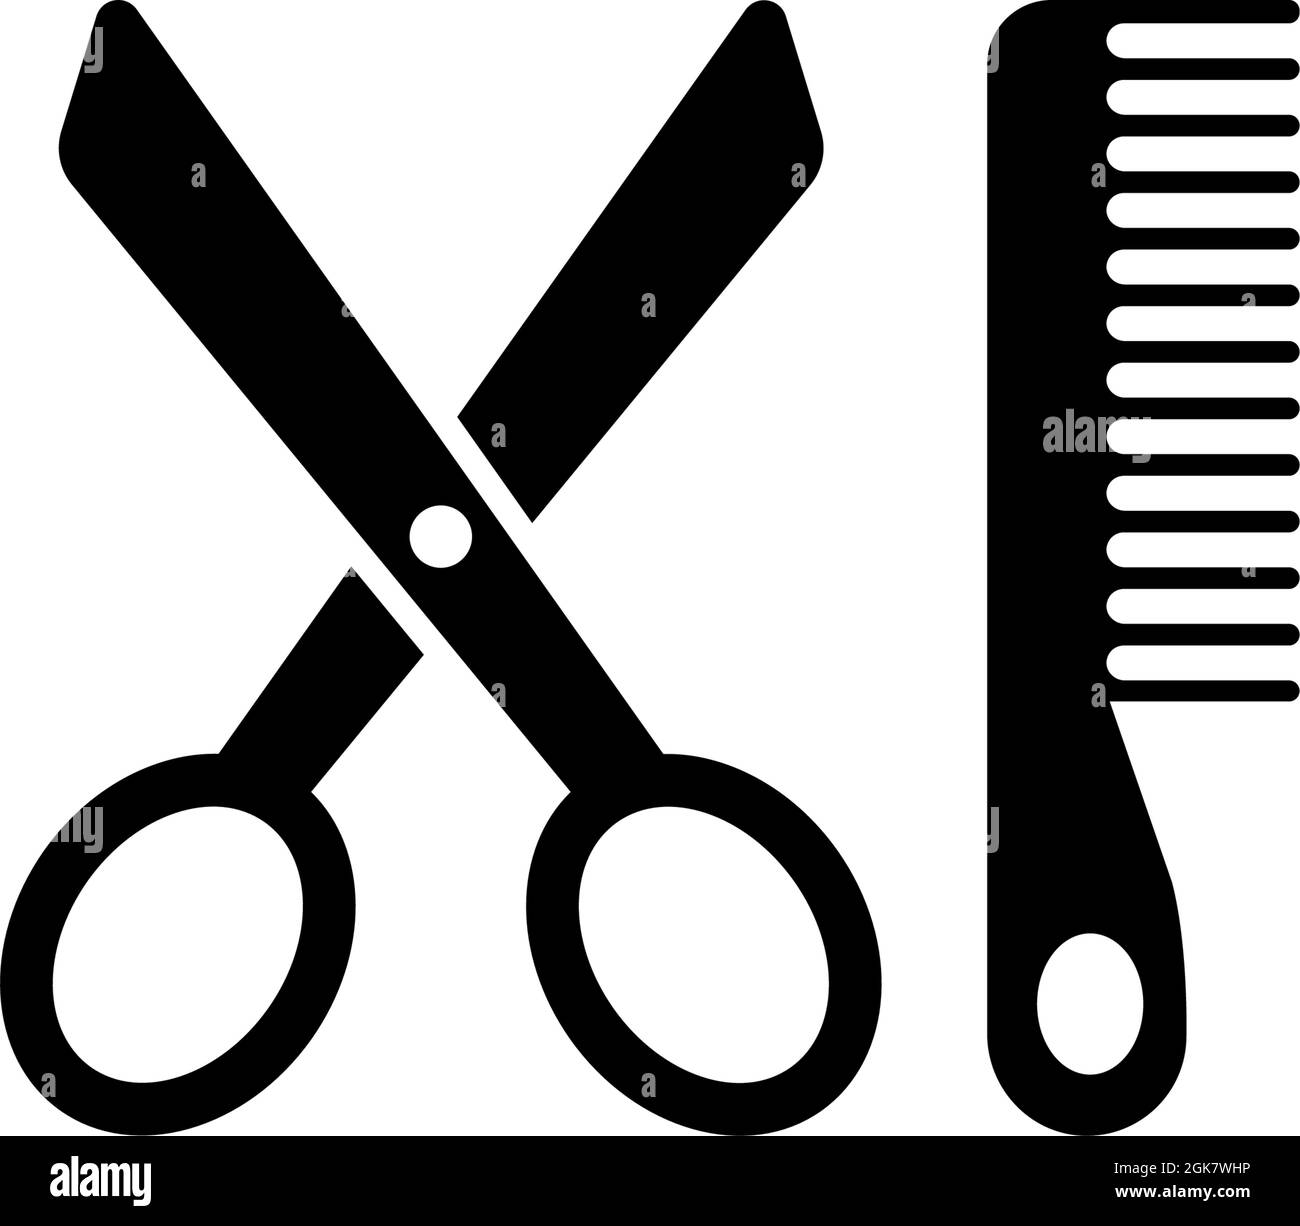 Scissors and Comb, Hairdresser Tools. Flat Vector Icon illustration. Simple black symbol on white background. Scissors and Comb, Hairdresser Tools sig Stock Vector